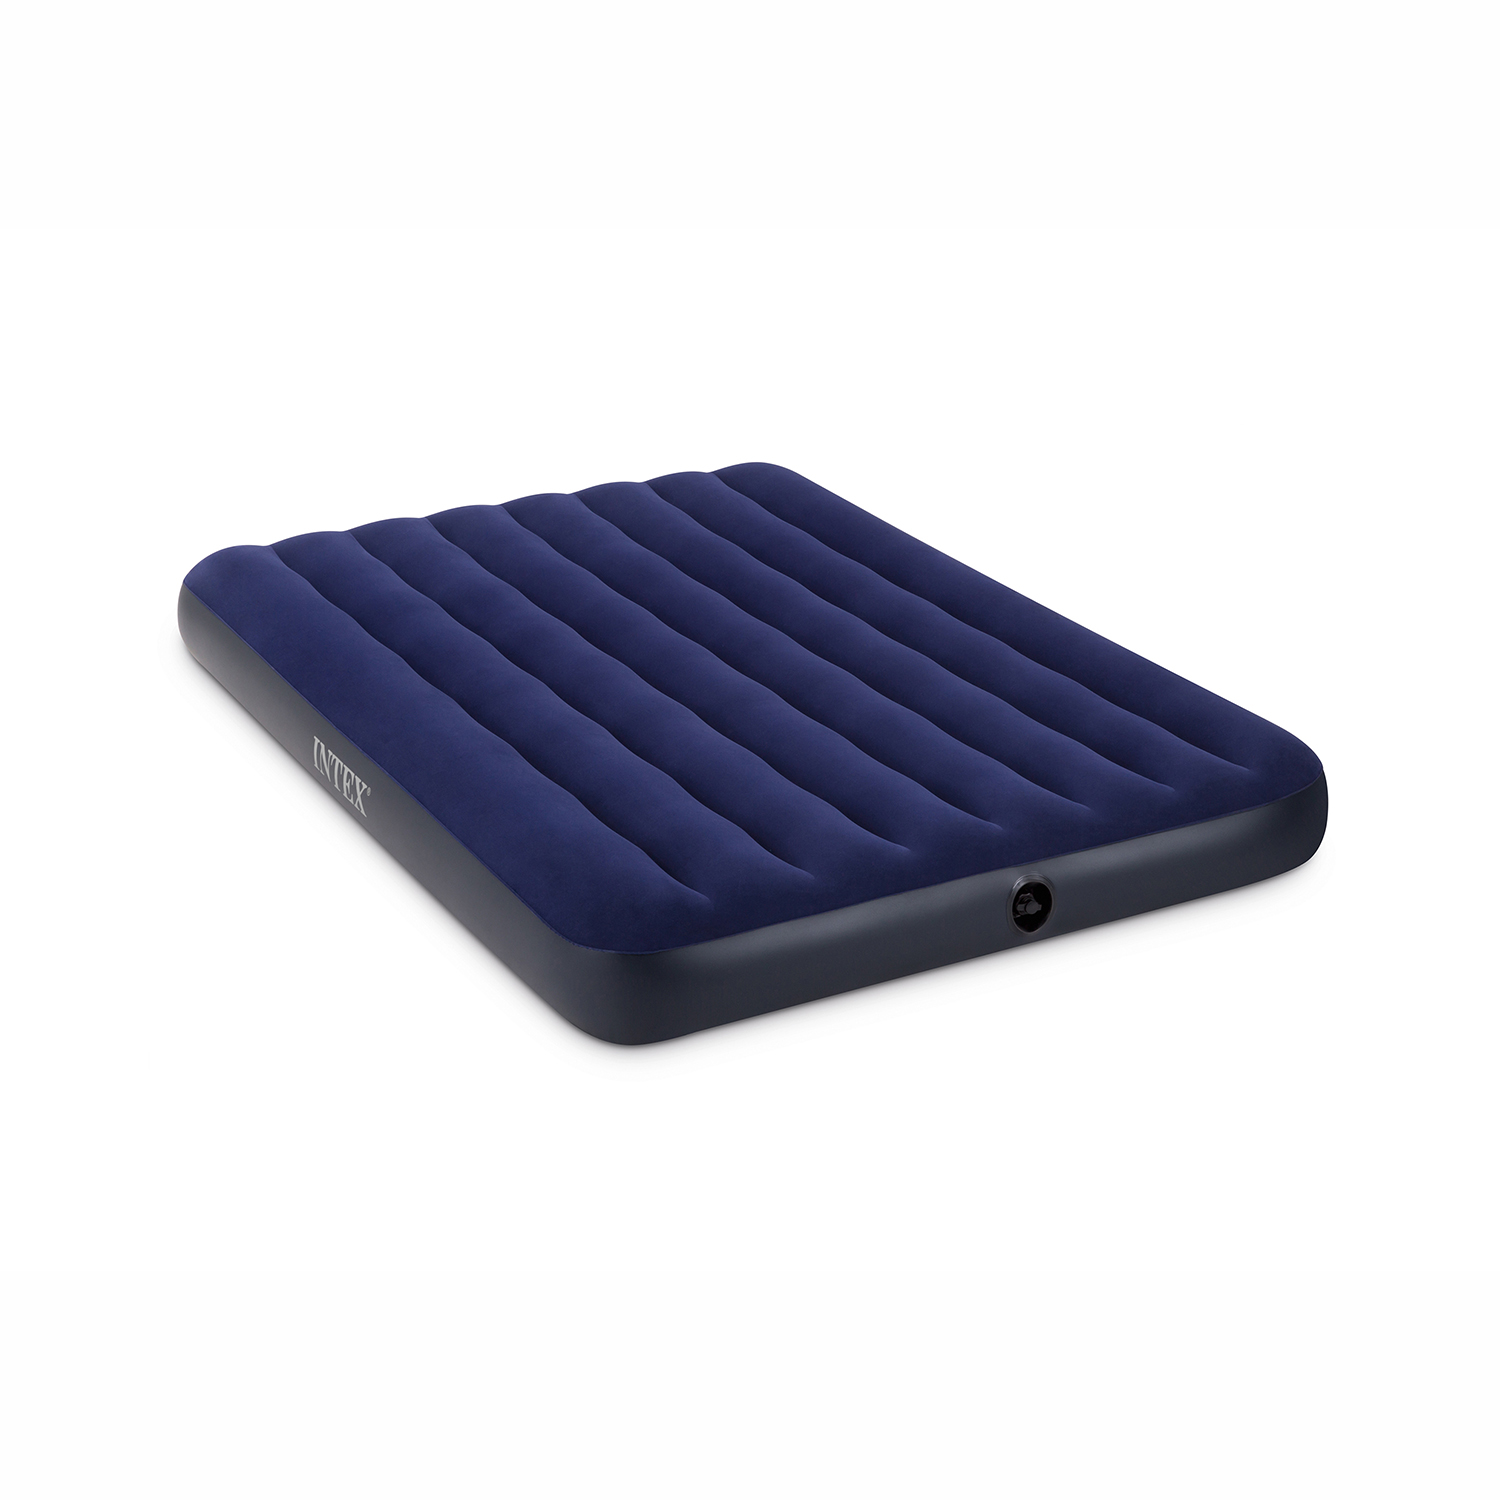 Intex Full 8.75" Classic Downy Inflatable Airbed Mattress - image 2 of 6